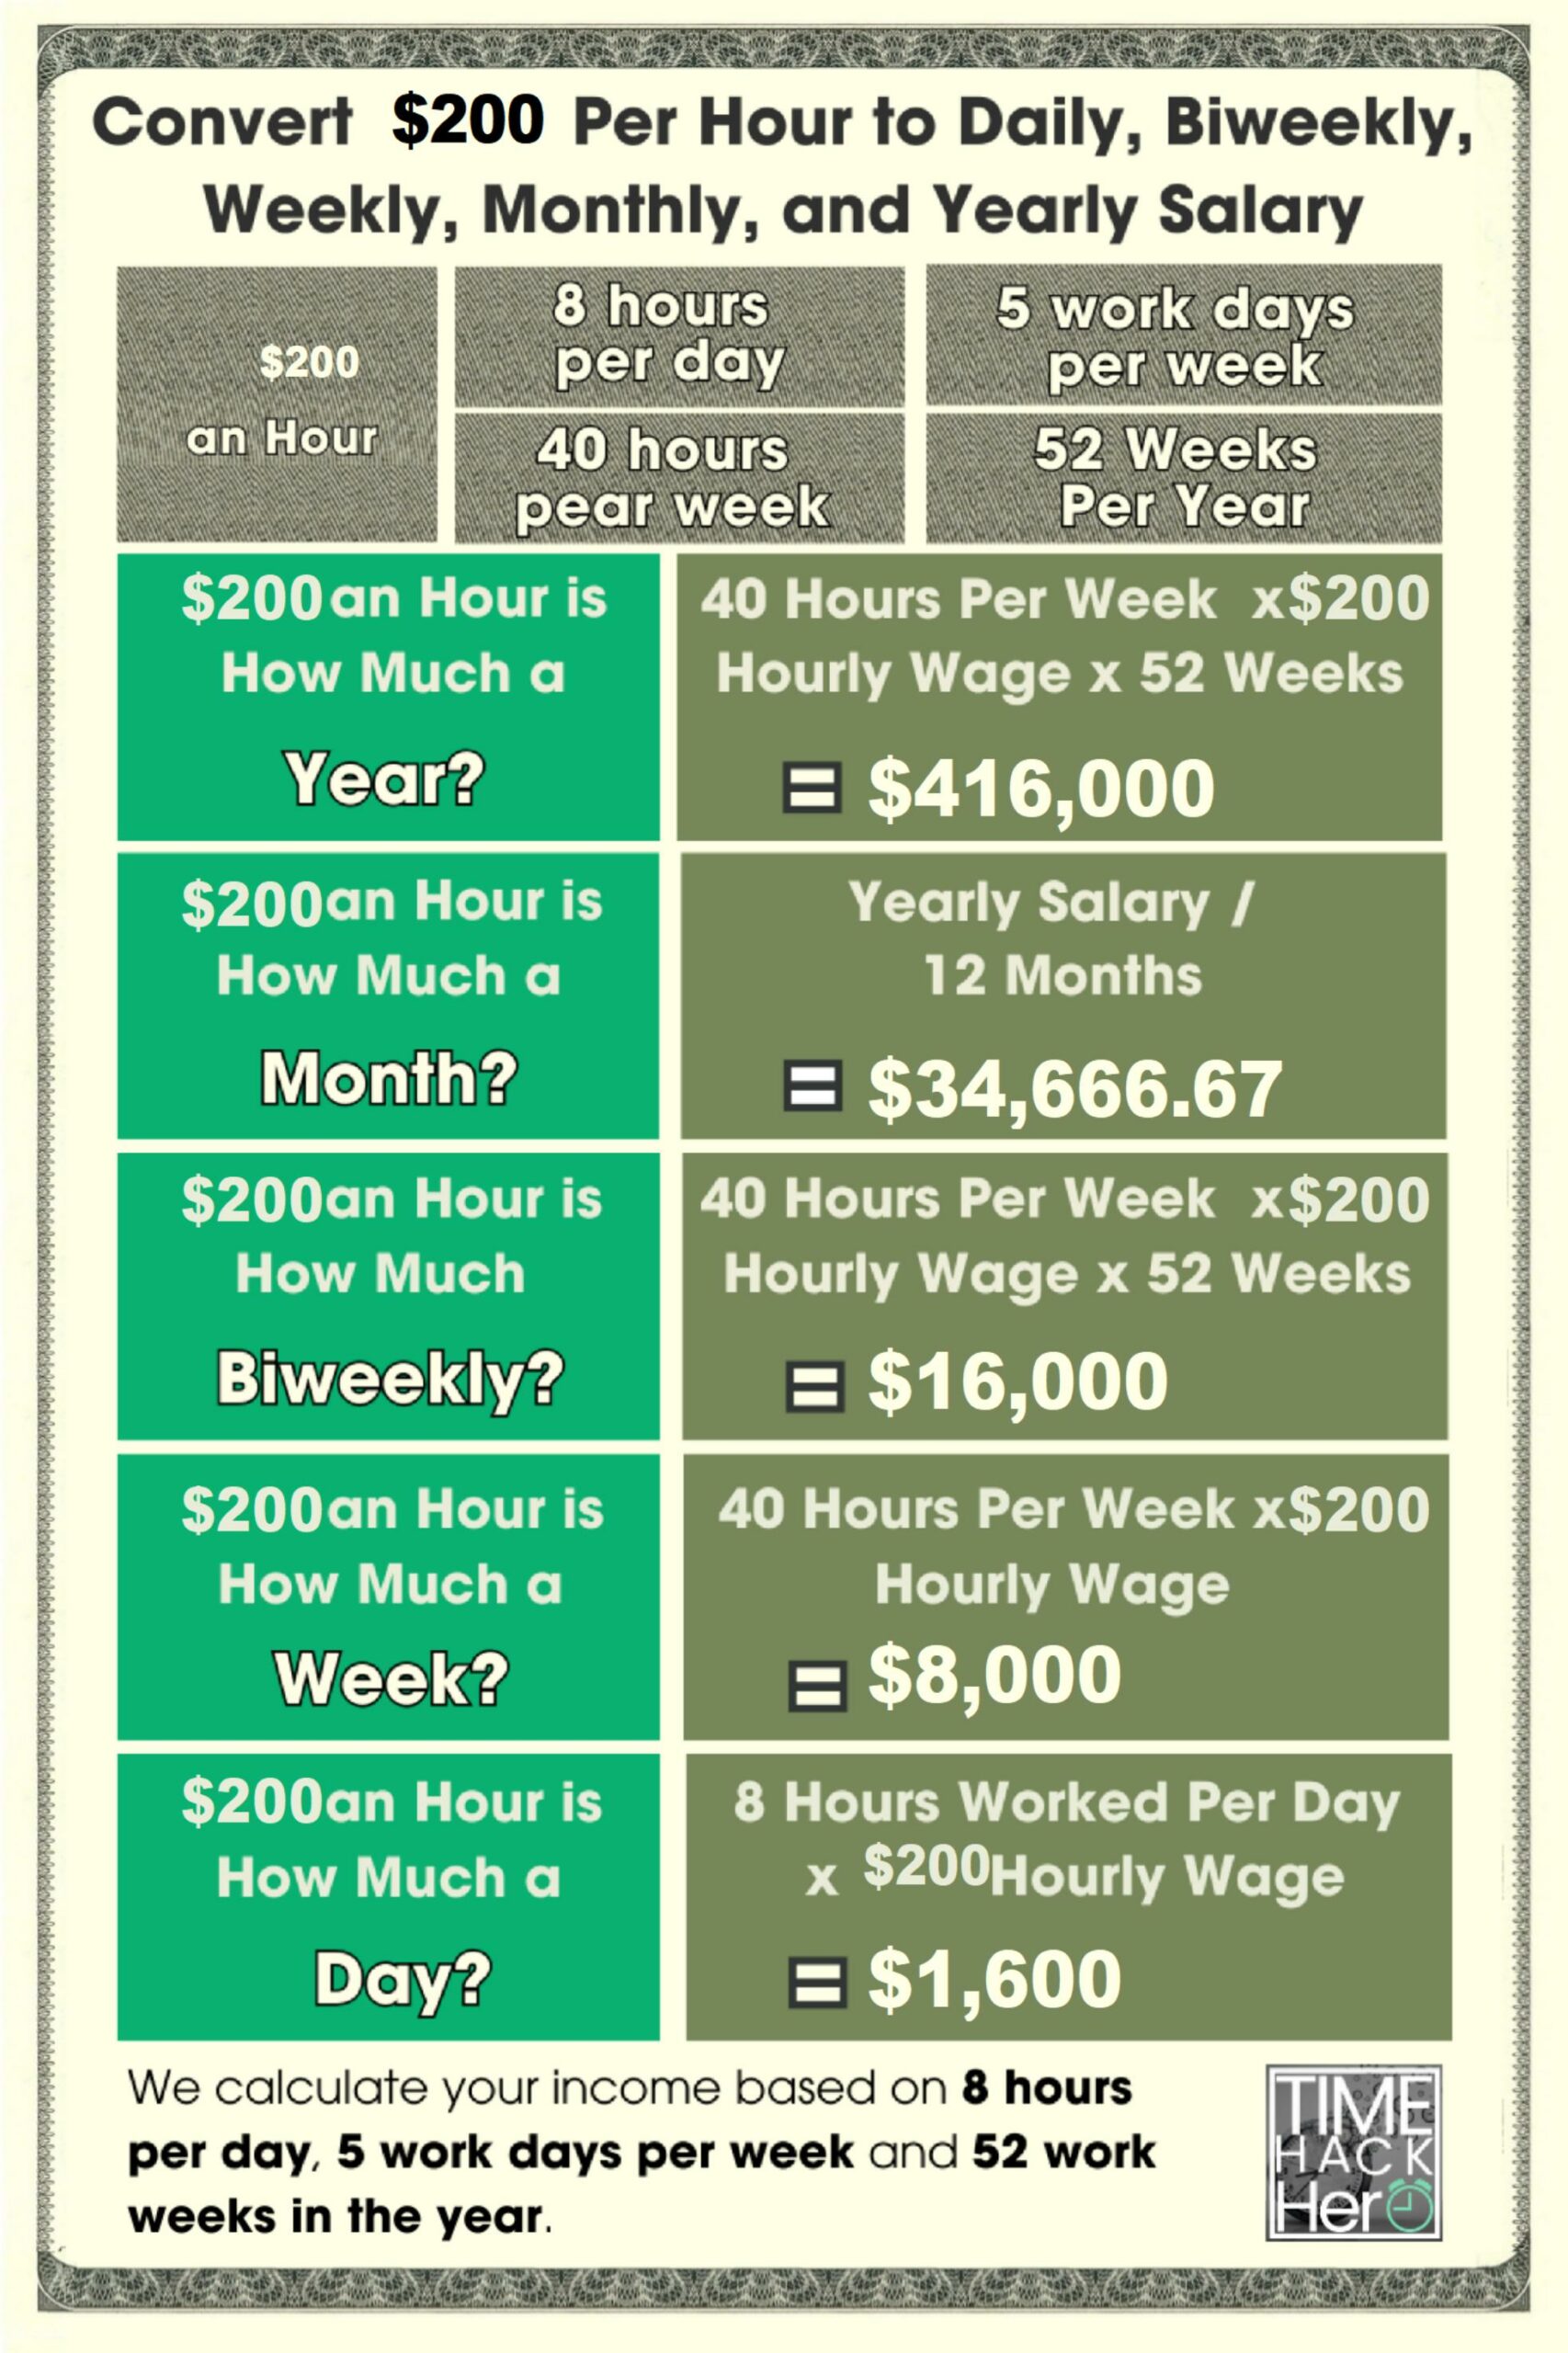 Convert $200 Per Hour to Weekly, Monthly, and Yearly Salary